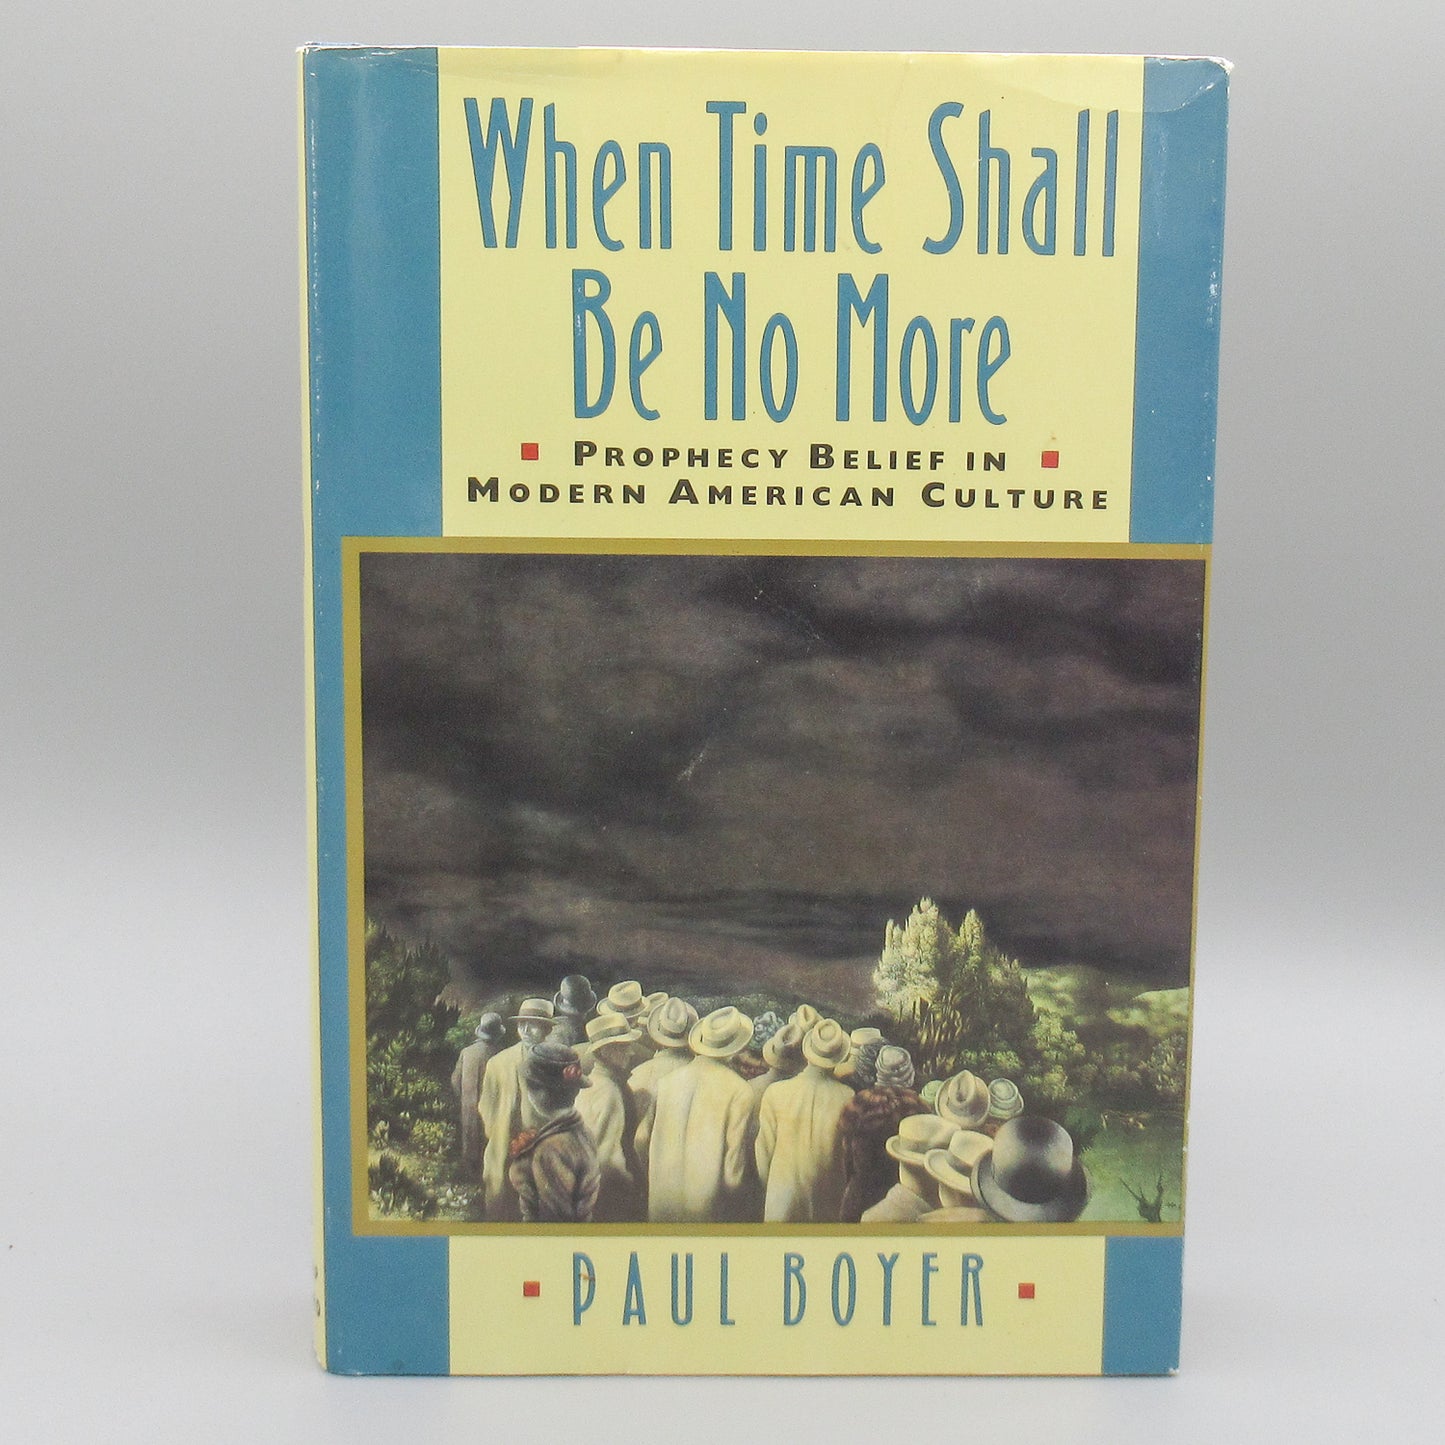 When Time Shall Be No More: Prophecy Belief in Modern American Culture